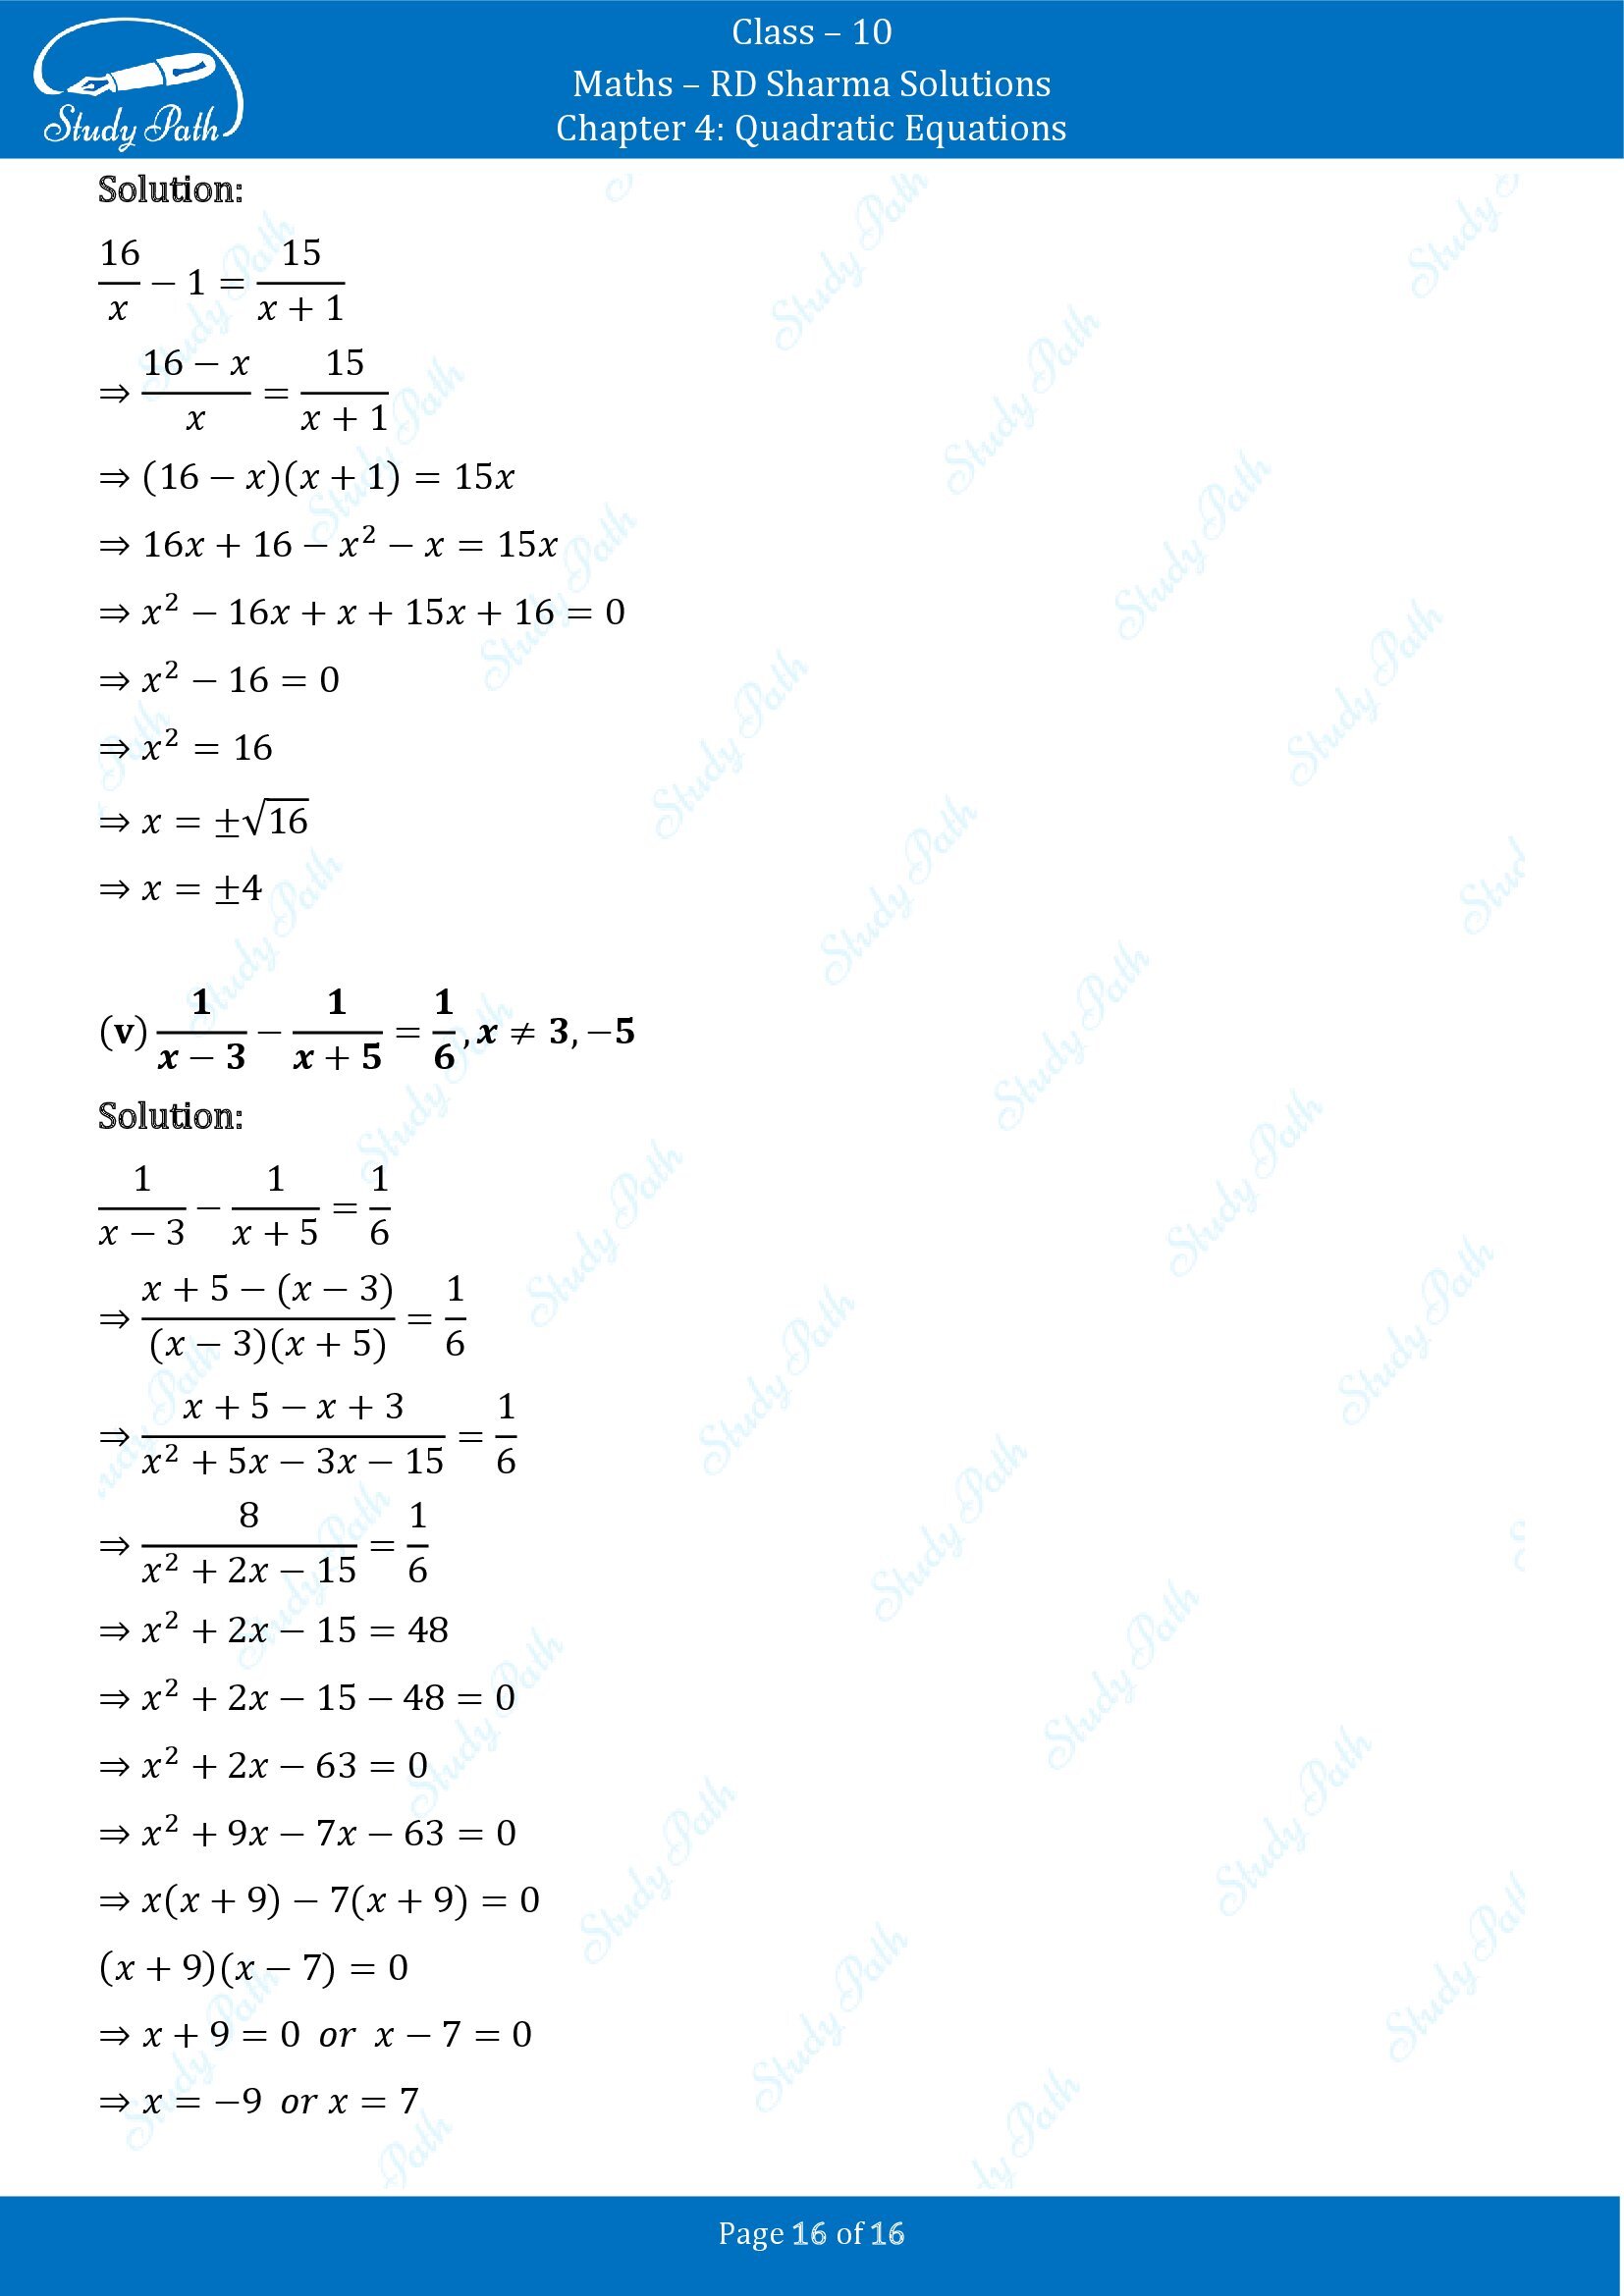 RD Sharma Solutions Class 10 Chapter 4 Quadratic Equations Exercise 4.5 00016